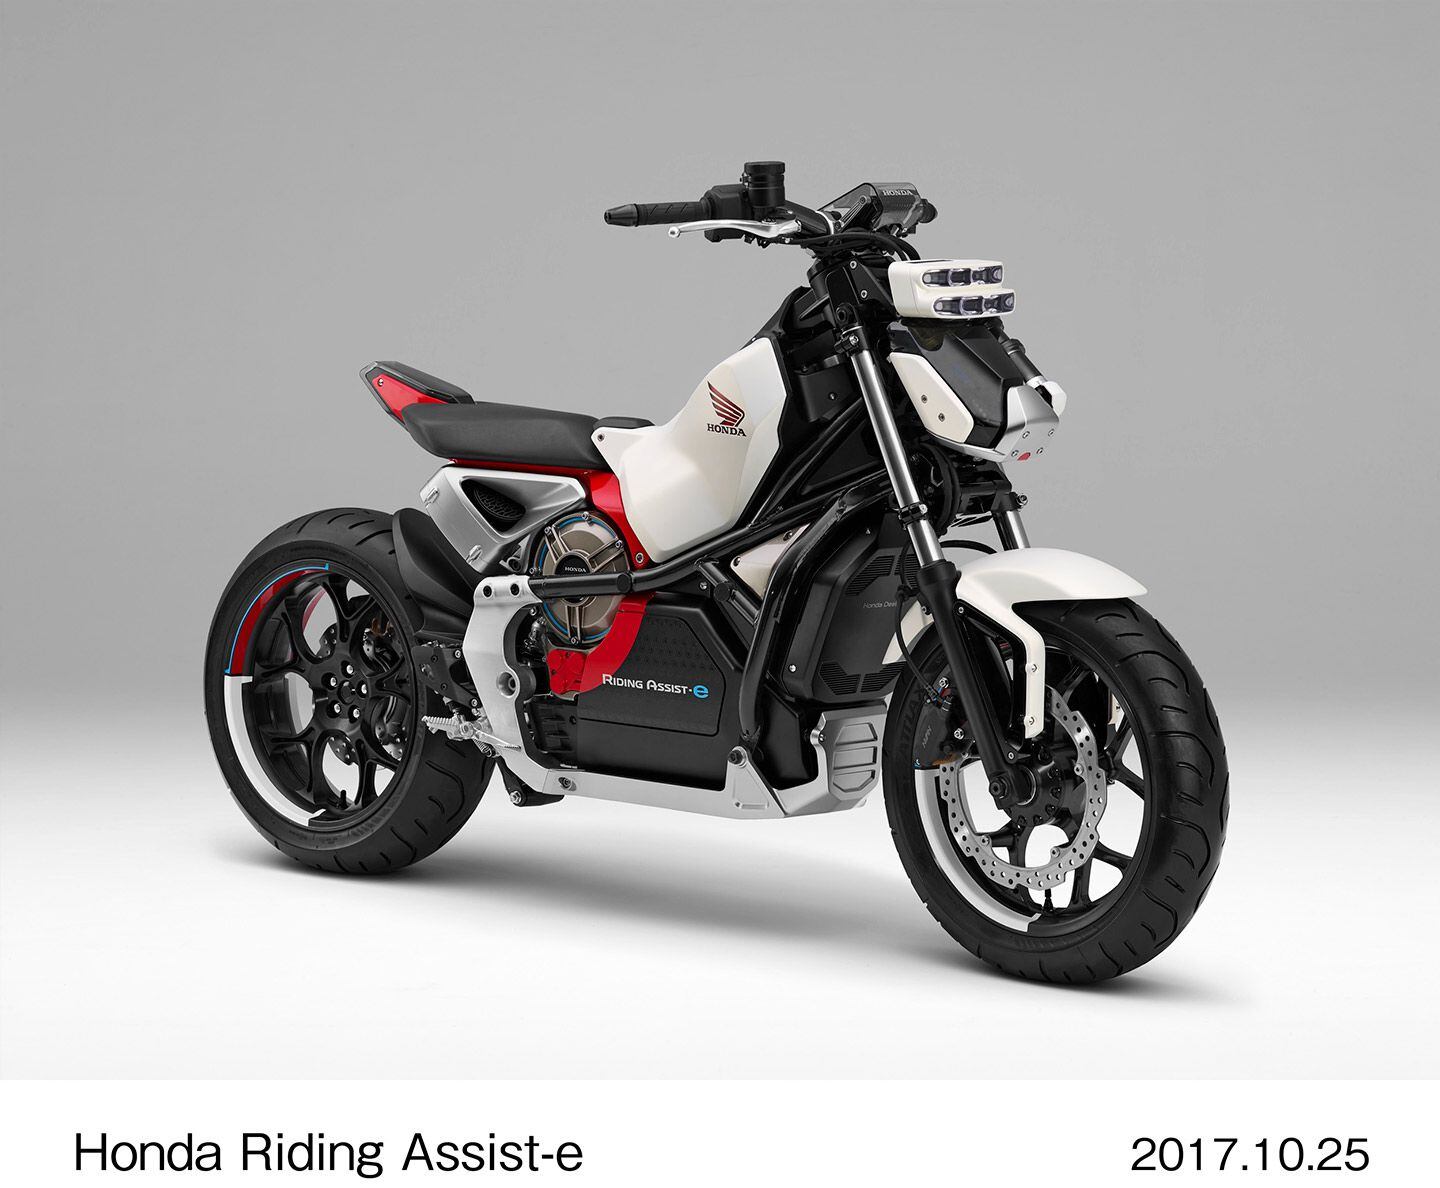 Honda’s Riding Assist-e concept from 2017 will be the basis of another proof of concept with a trio of electric motors that not only provide drive, but influence handling.